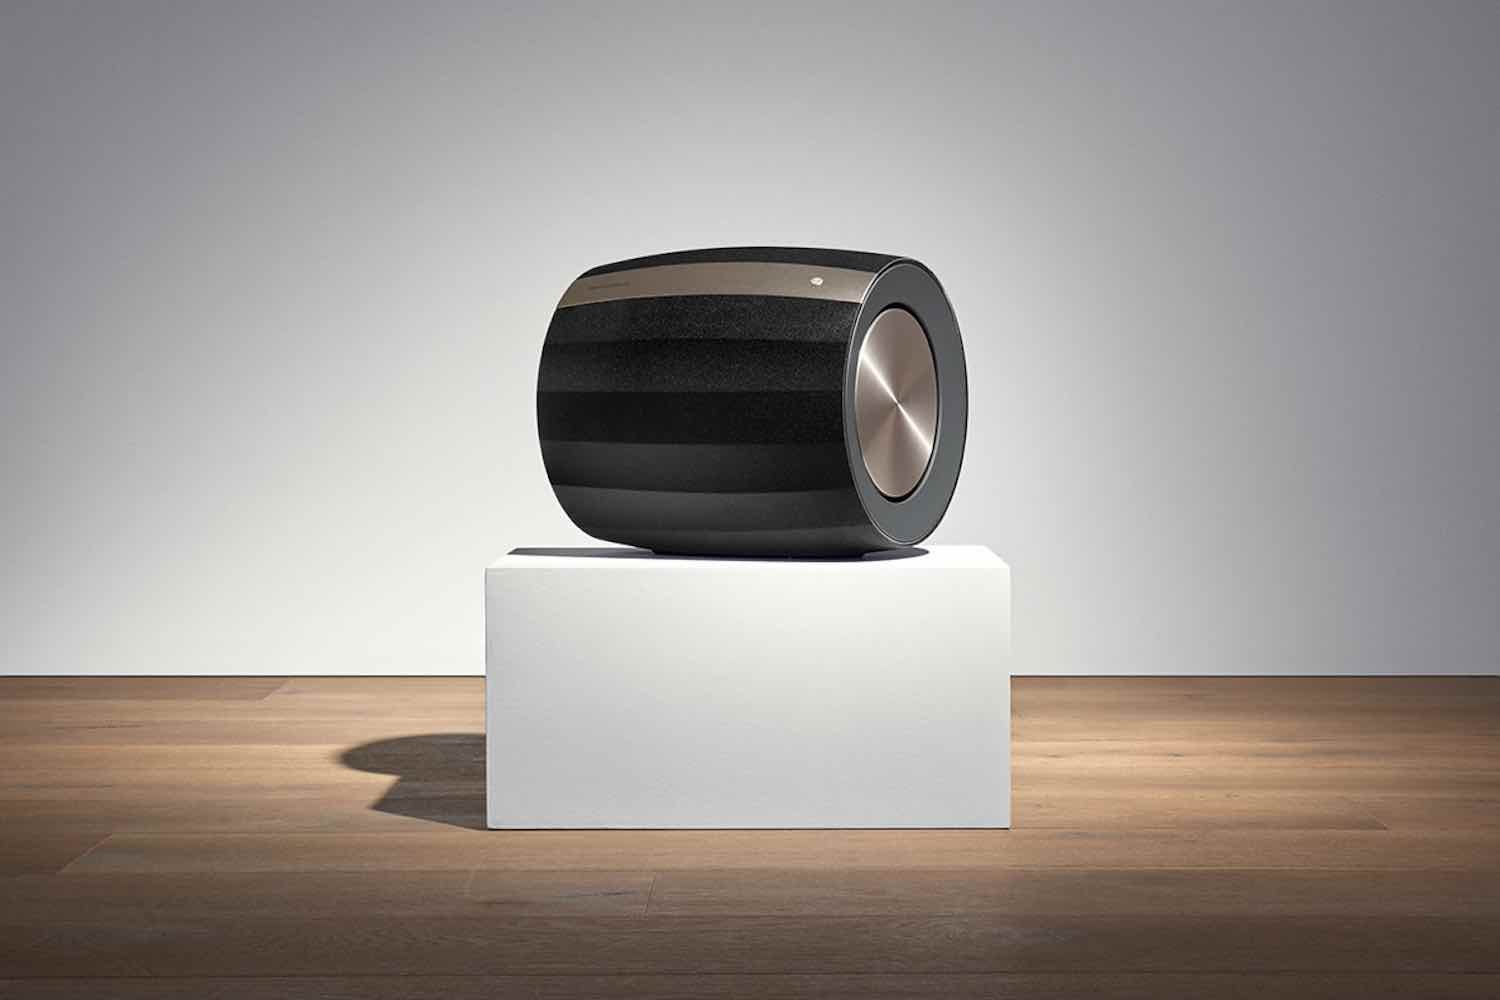 B&W Bowers & Wilkins Formation Bass Subwoofer